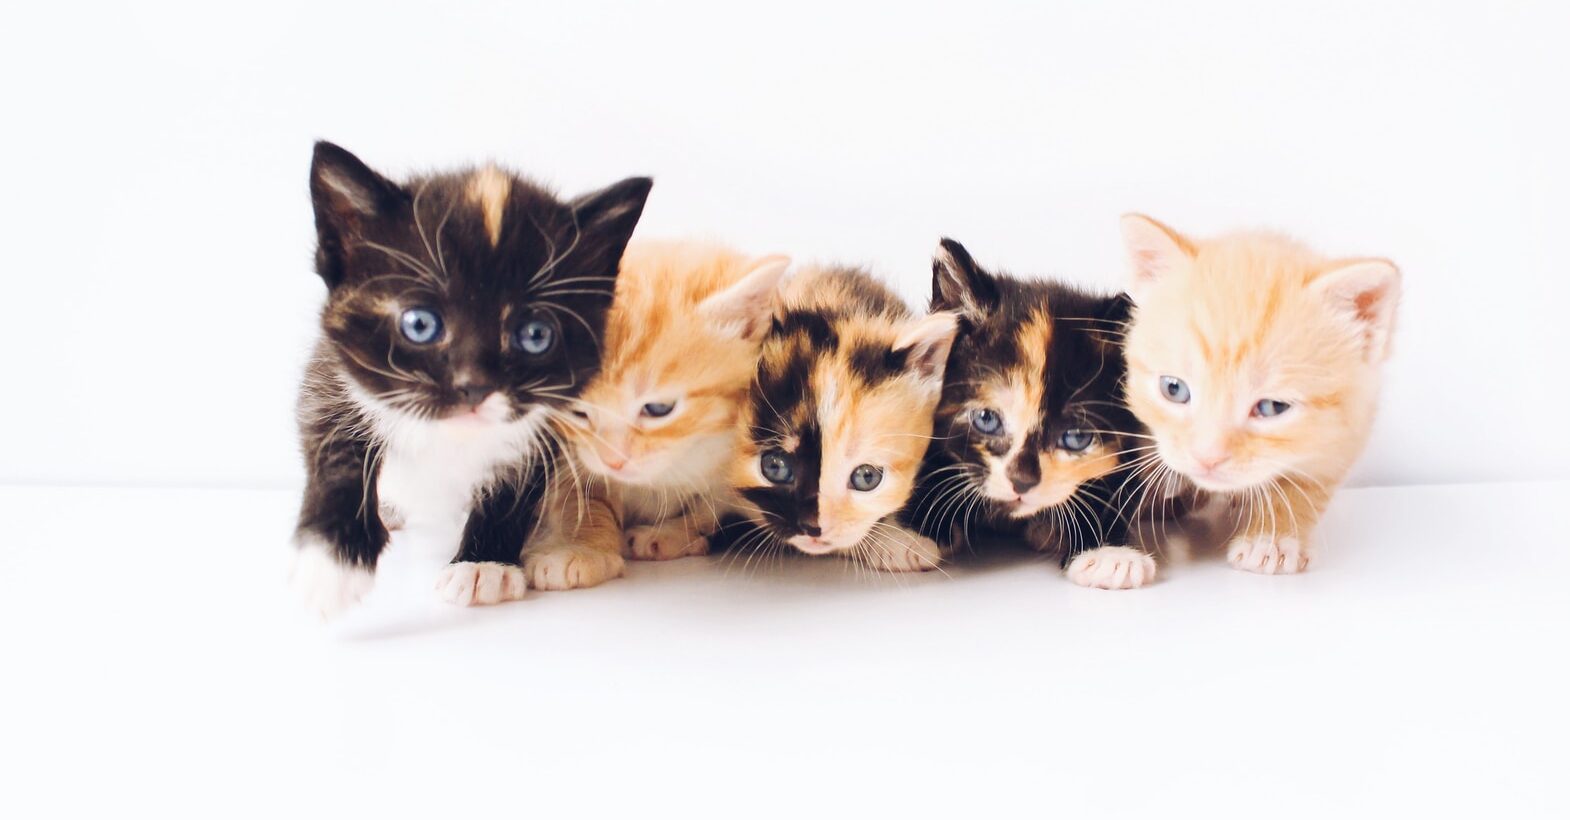 assorted-color tabby kittens